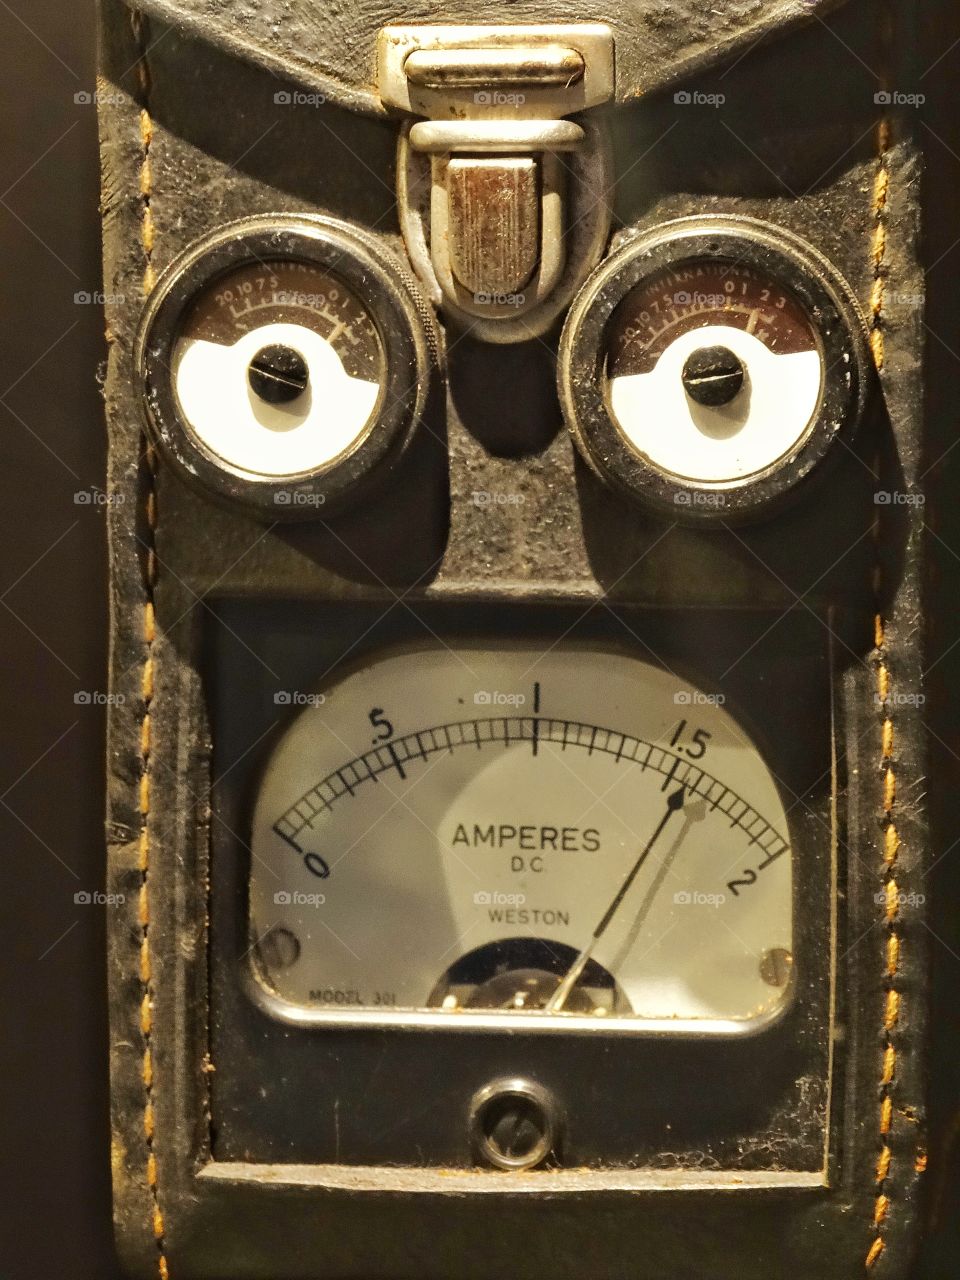 Anthropomorphic Art. Electrical Gauges Formed To Resemble A Face
